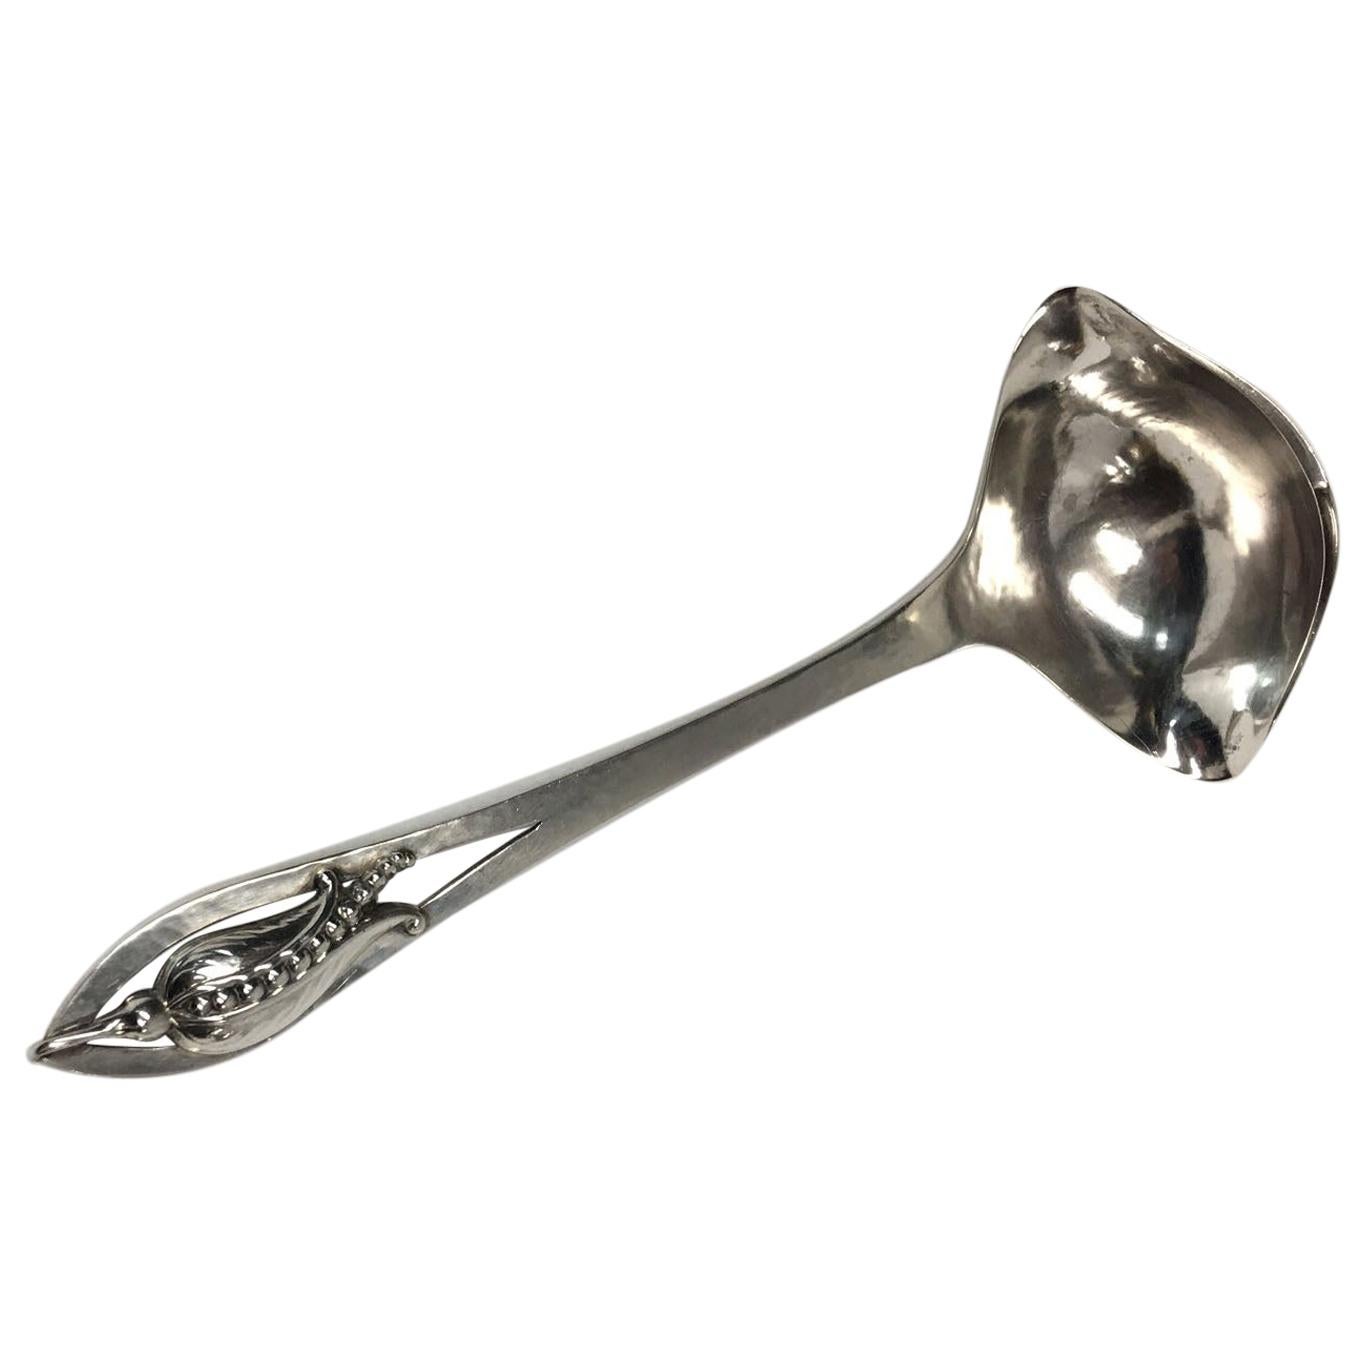 Iconic Carl Poul Petersen Sterling Silver Ladle 